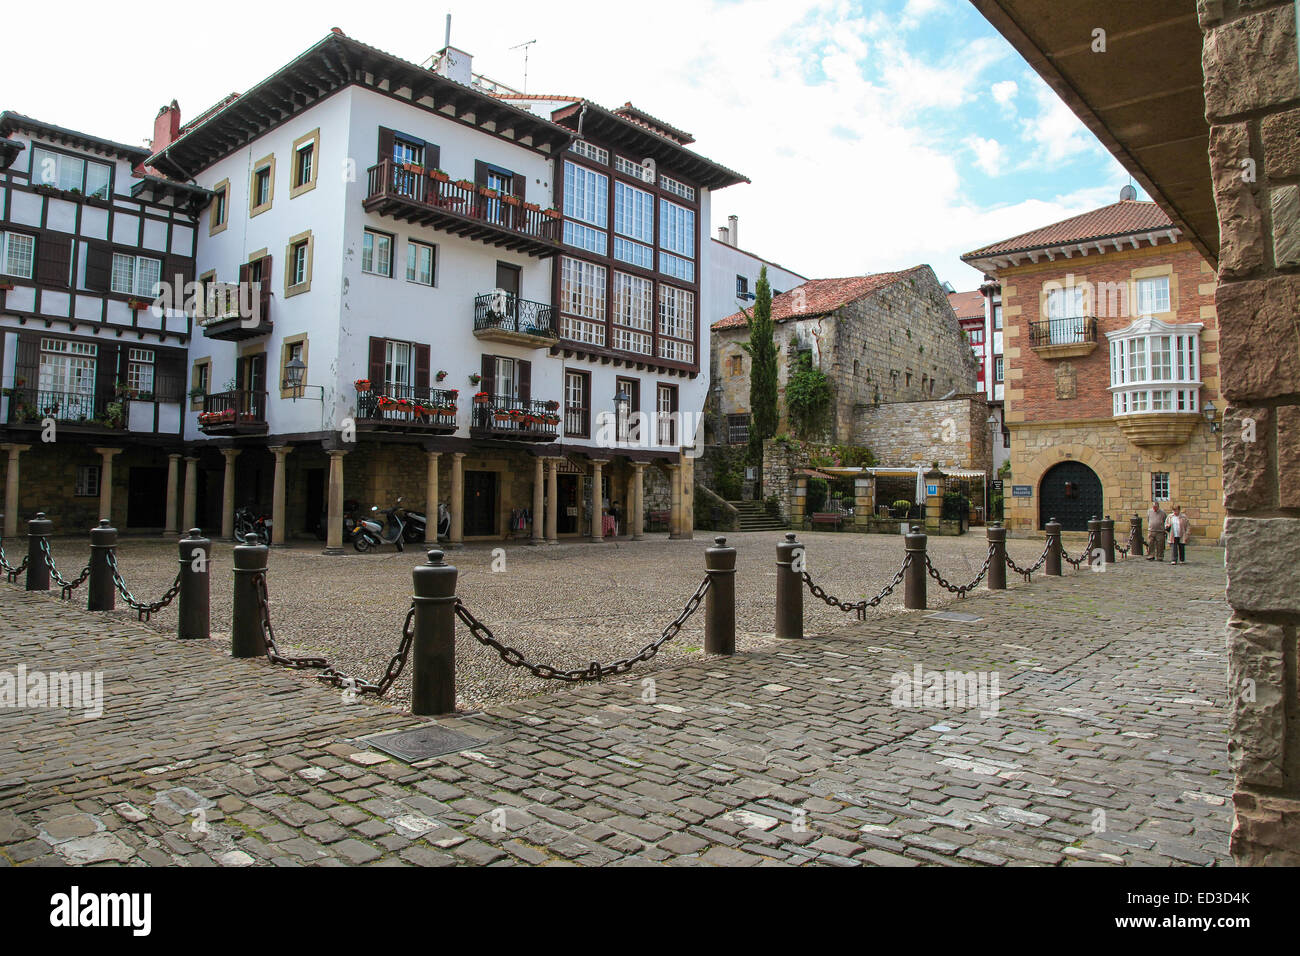 HONDARRIBIA, SPAIN - MAY 27, 2014: Old houses in the center of Hondarribia, a town in Gipuzkoa, Basque Country, Spain Stock Photo